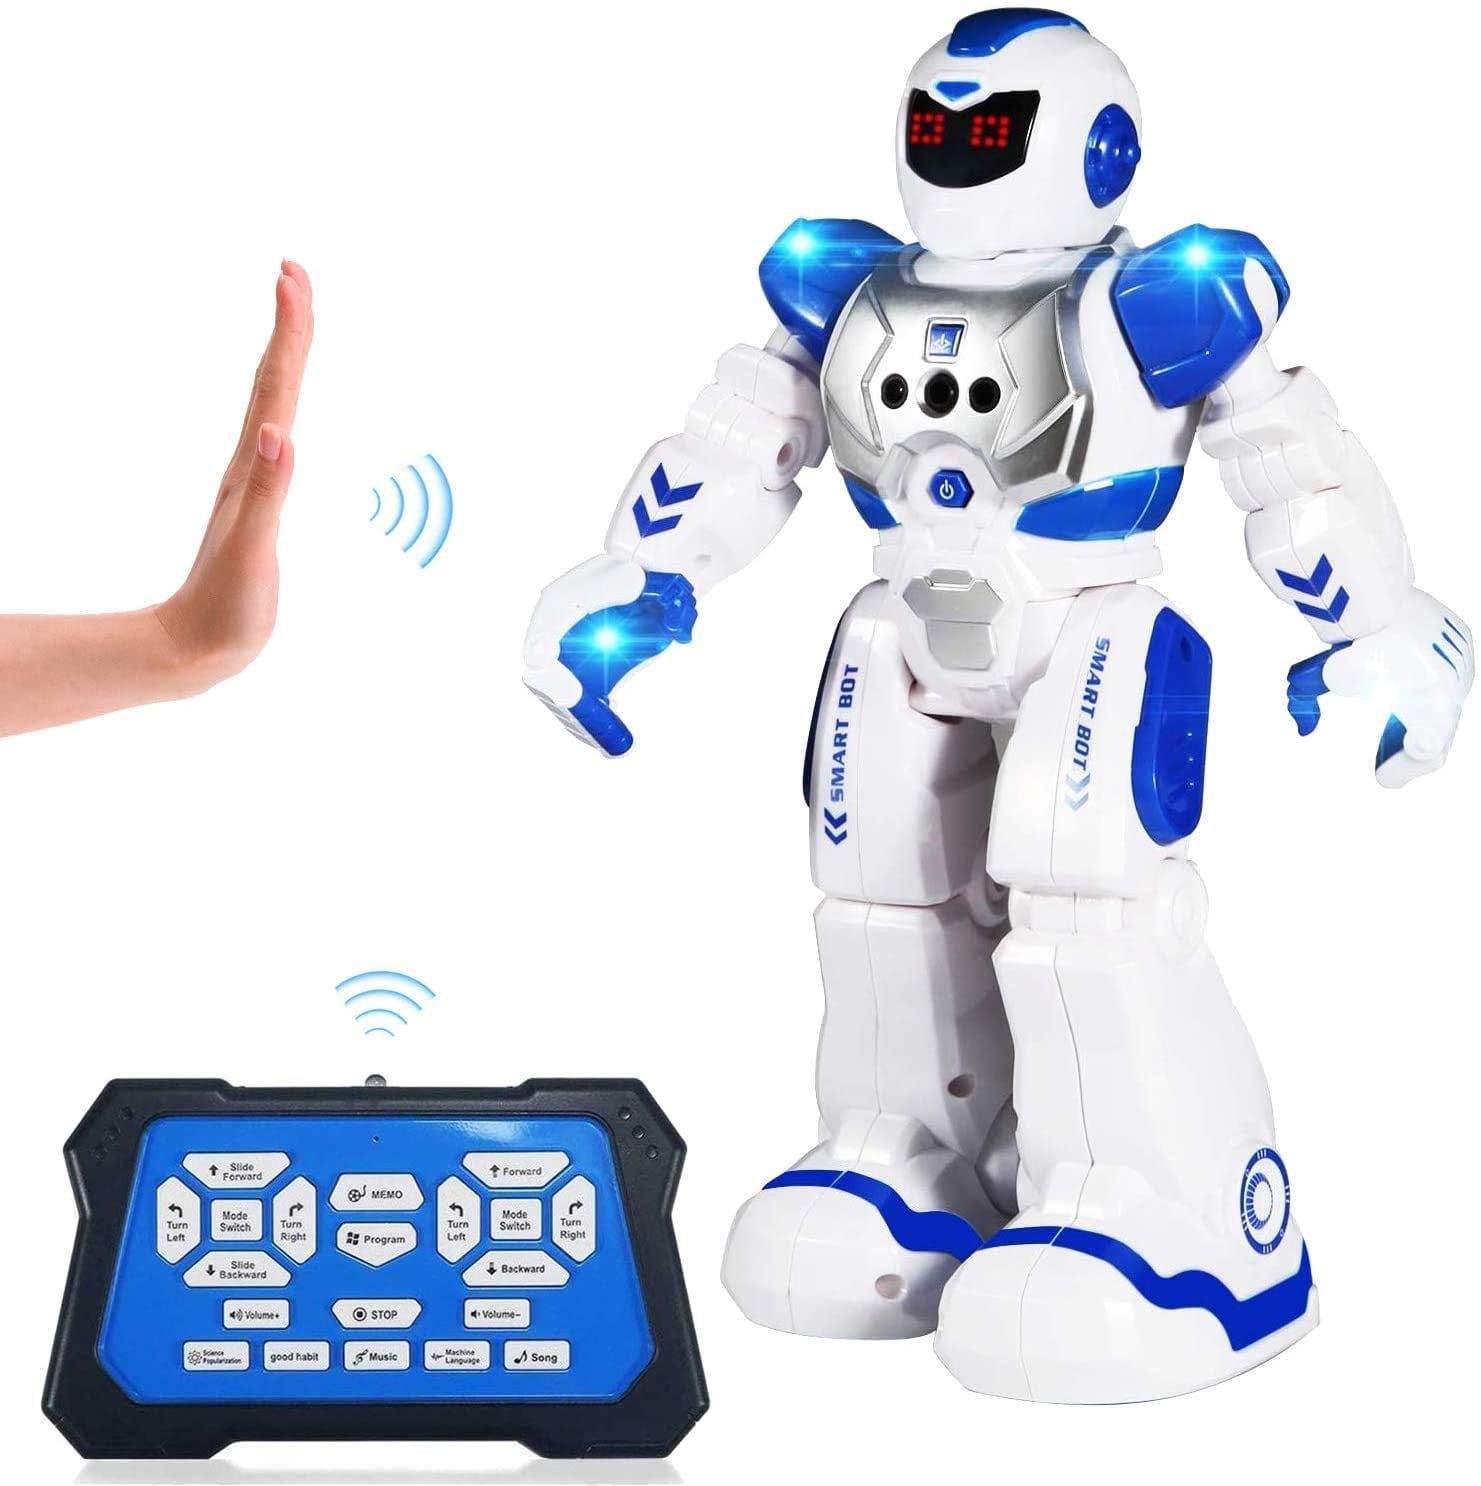 RC Programmable Intelligent 822 children toy Remote Control Robot Toy for Kids 